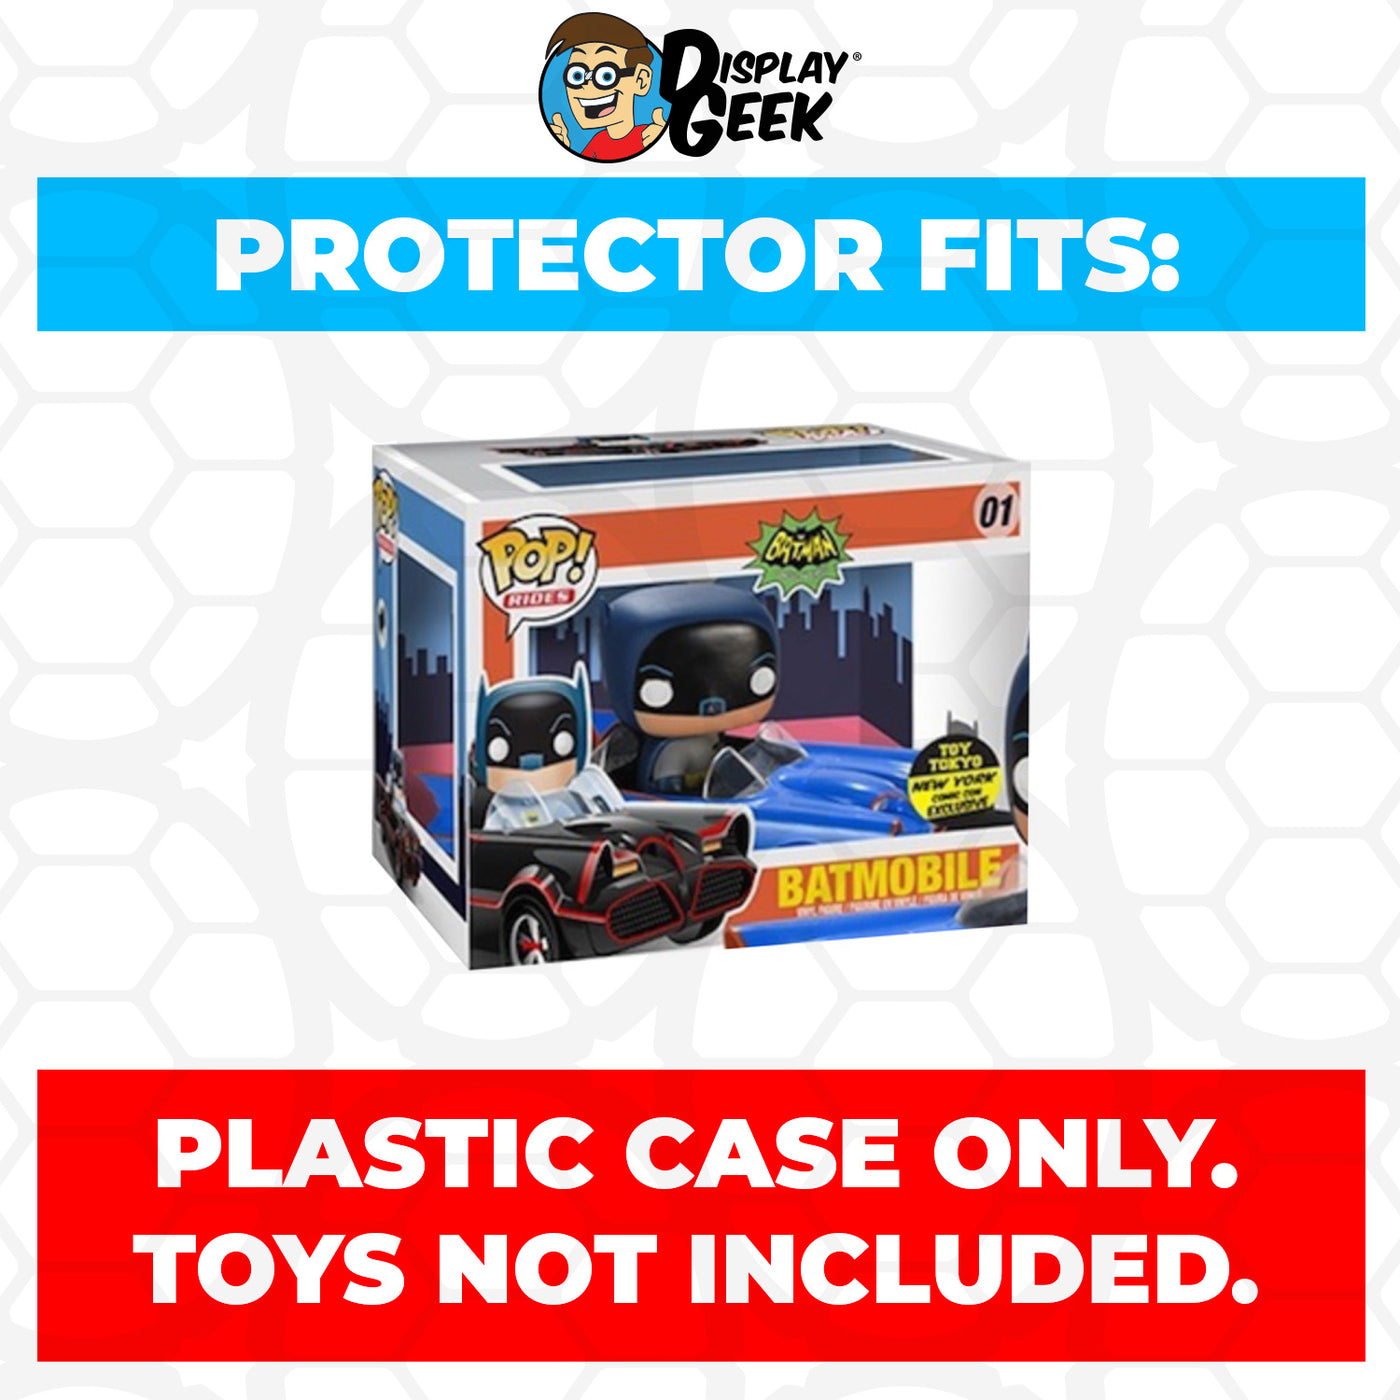 Pop Protector for Batmobile Blue NYCC #01 Funko Pop Rides on The Protector Guide App by Display Geek